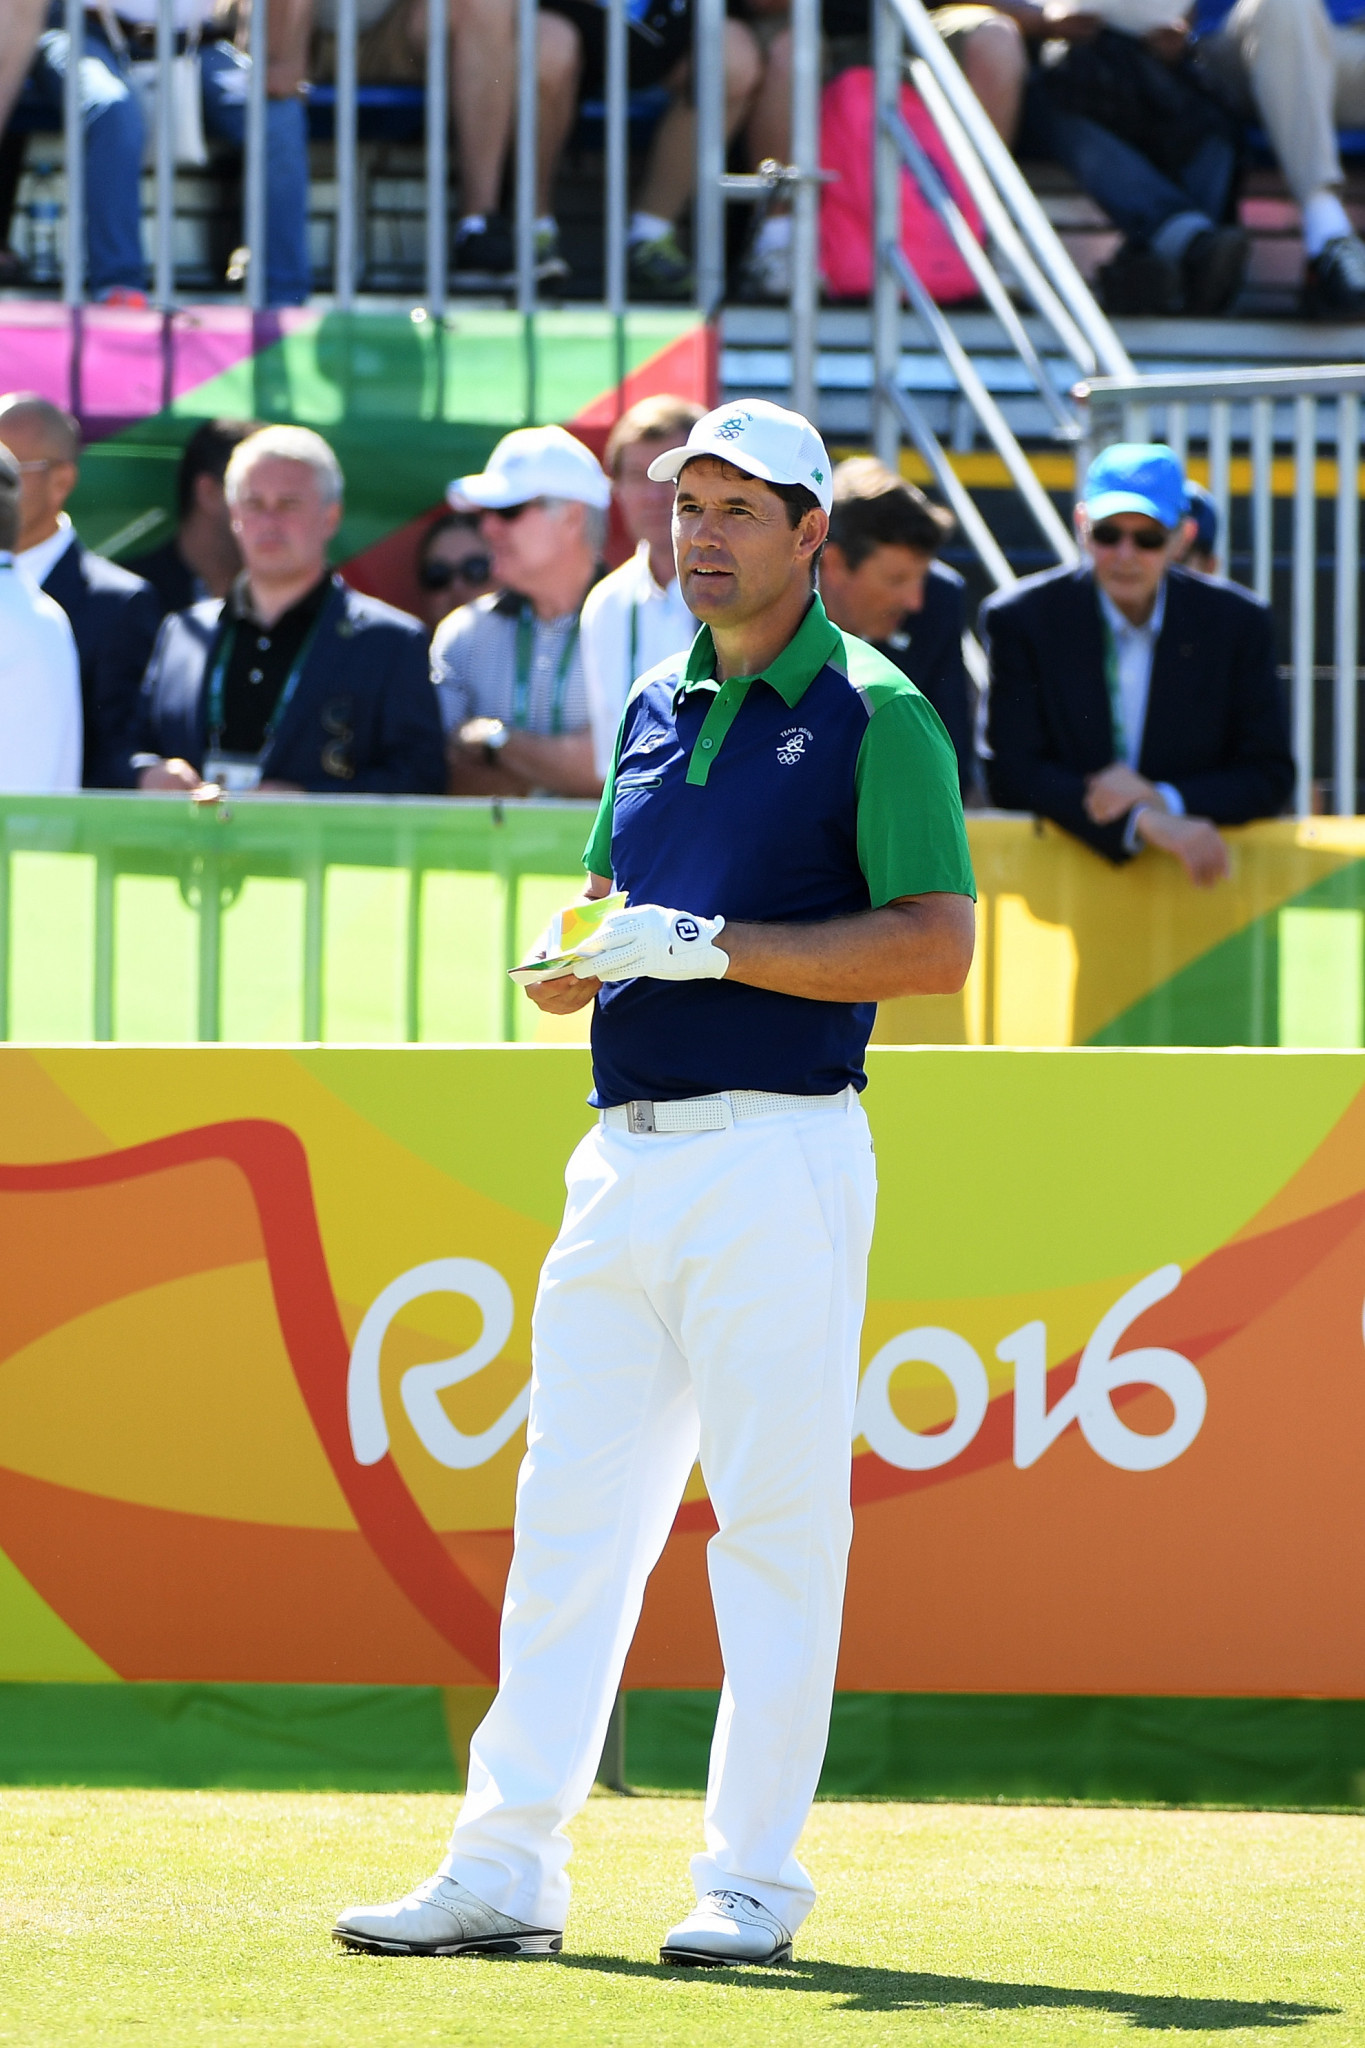 Pádraig Harrington, Open champion in 2007 and 2008, represented Ireland at Rio 2016 along with Séamus Power after Shane Lowry and Rory McIlroy turned down the opportunity ©Getty Images 